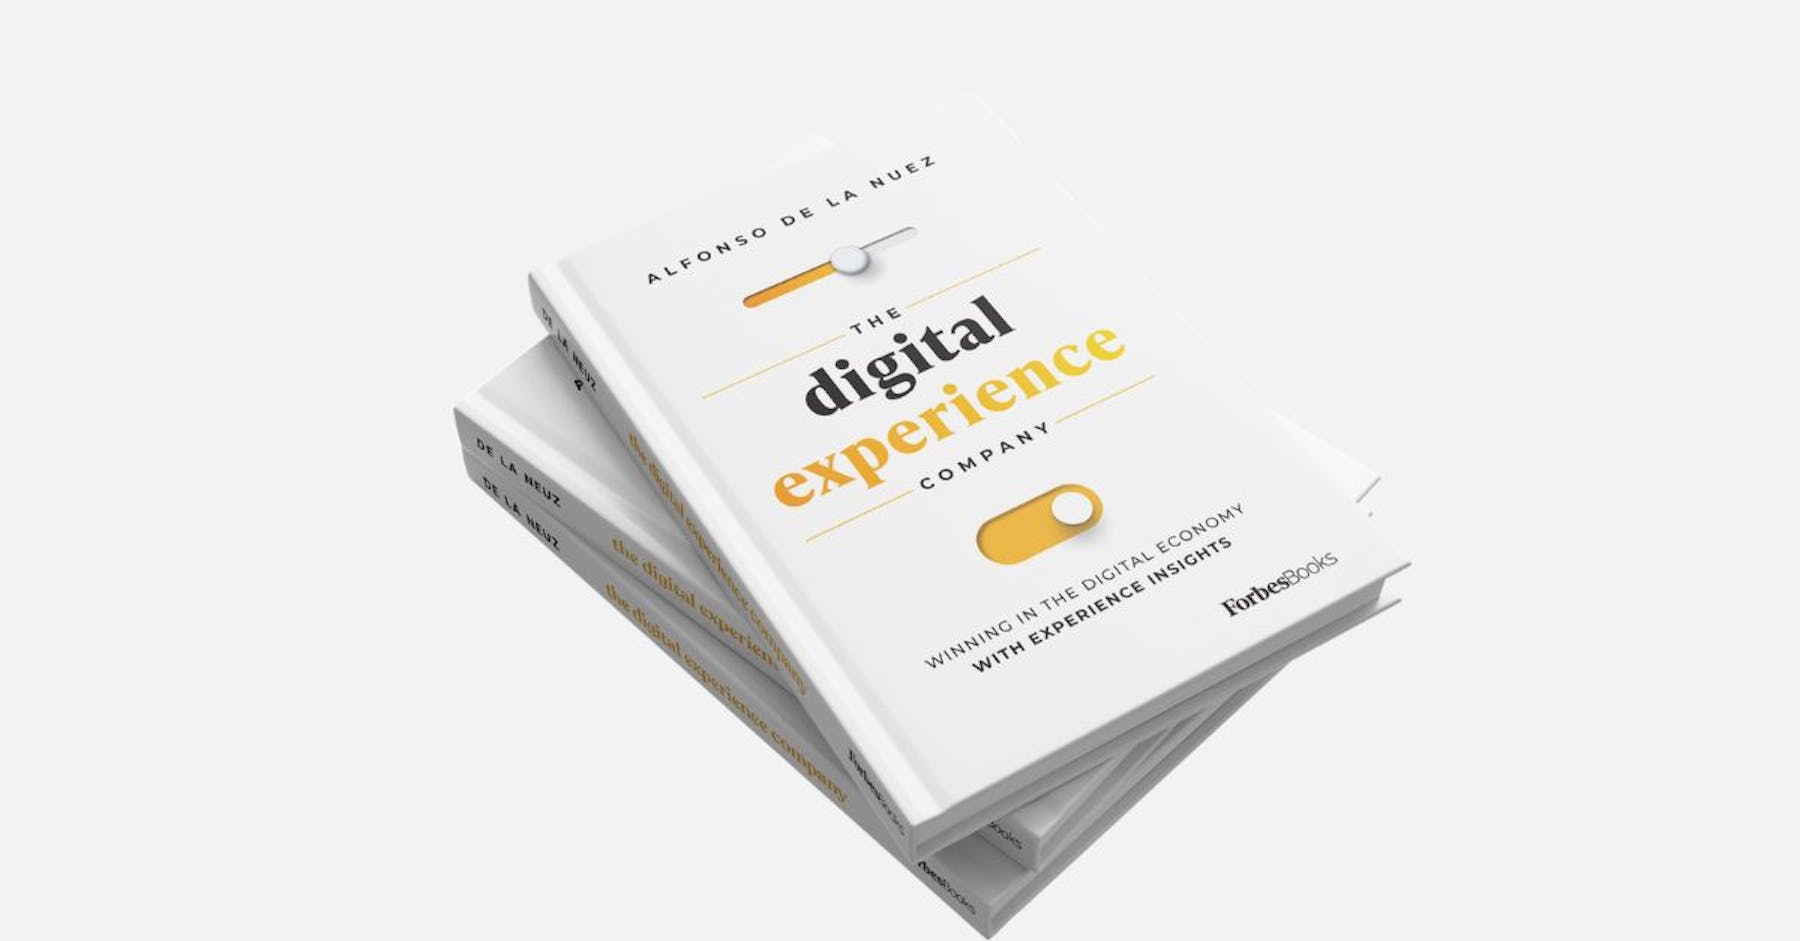 Order The Digital Experience Company, the new book from UserZoom co-Founder and Chief Visionary Officer Alfonso de la Nuez